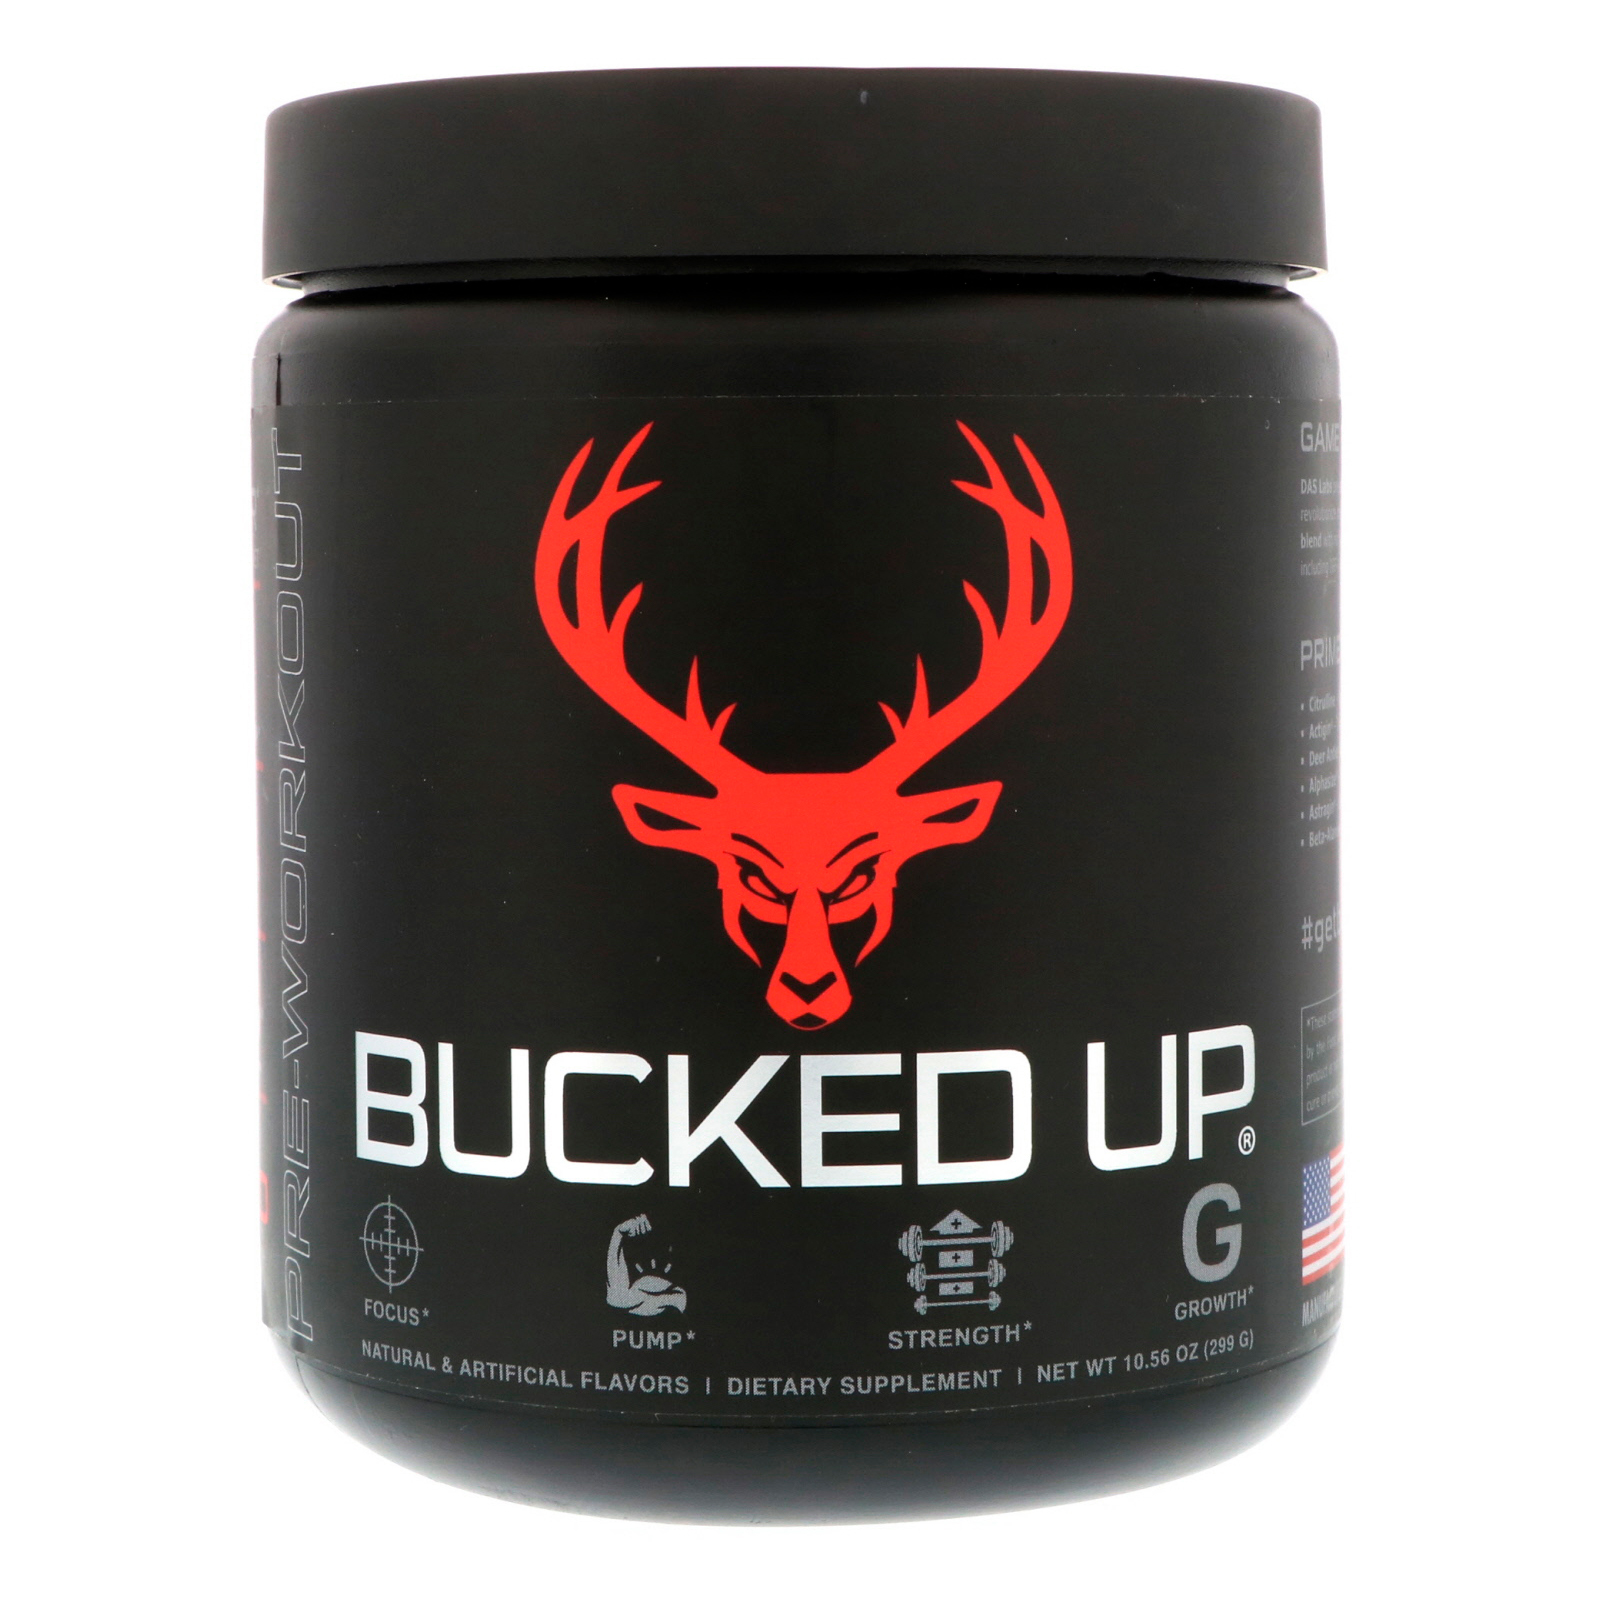 6 Day Pre Workout Bucked Up Review for push your ABS